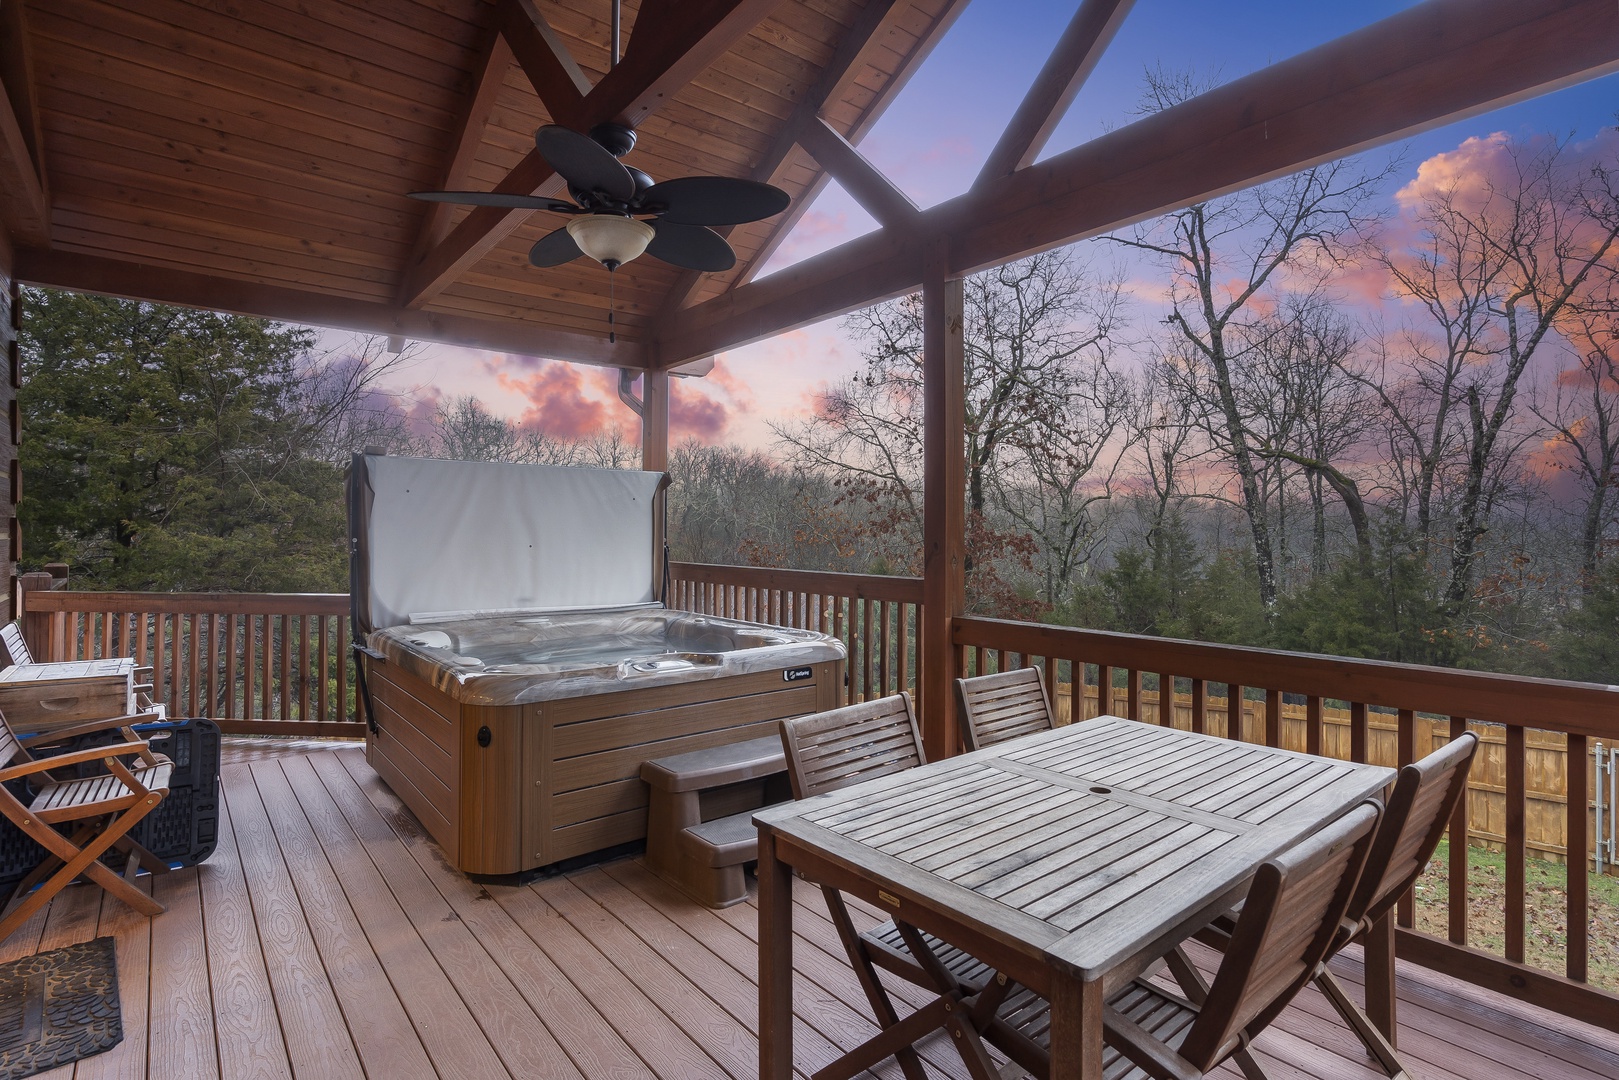 Indulge in the seclusion of the private hot tub